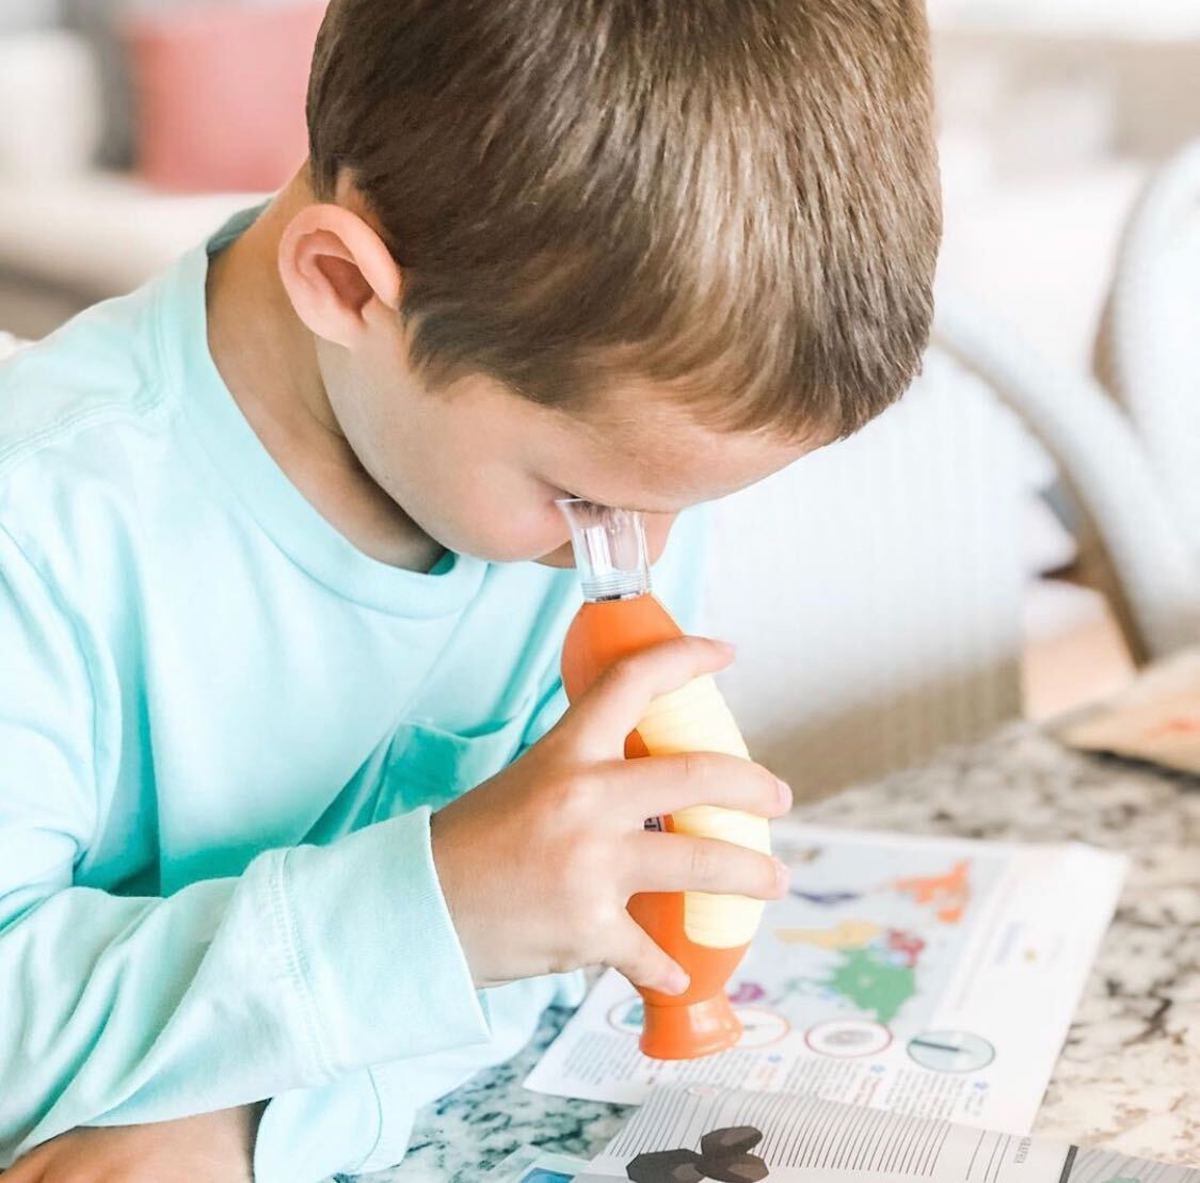 25 Awesome Educational Toys & Games For Kids This Christmas